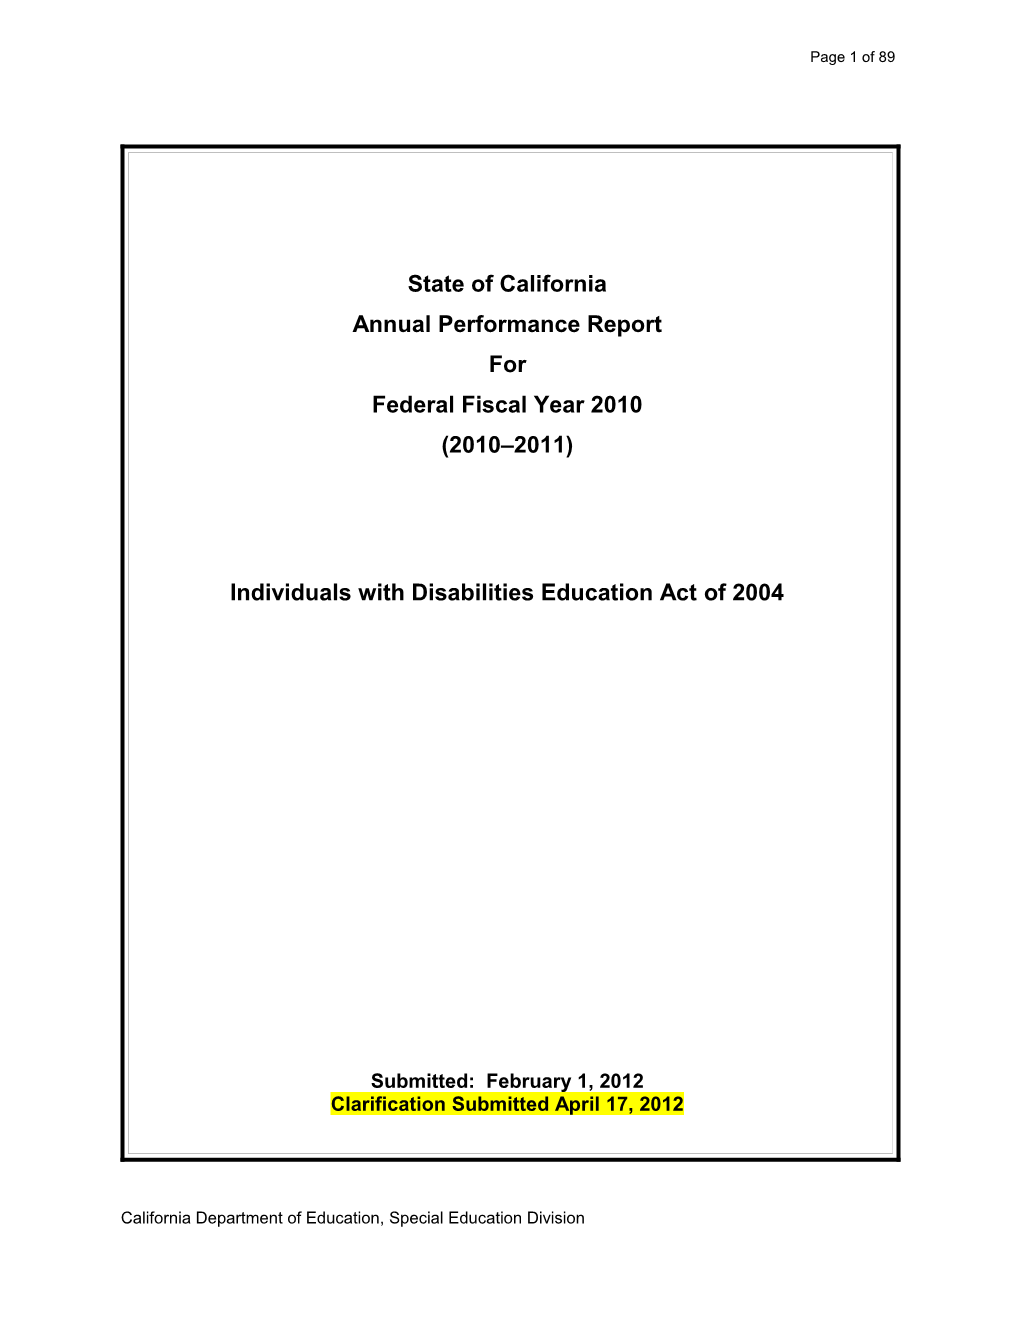 Annual Performance Report FFY 2010 - Quality Assurance Process (CA Dept of Education)